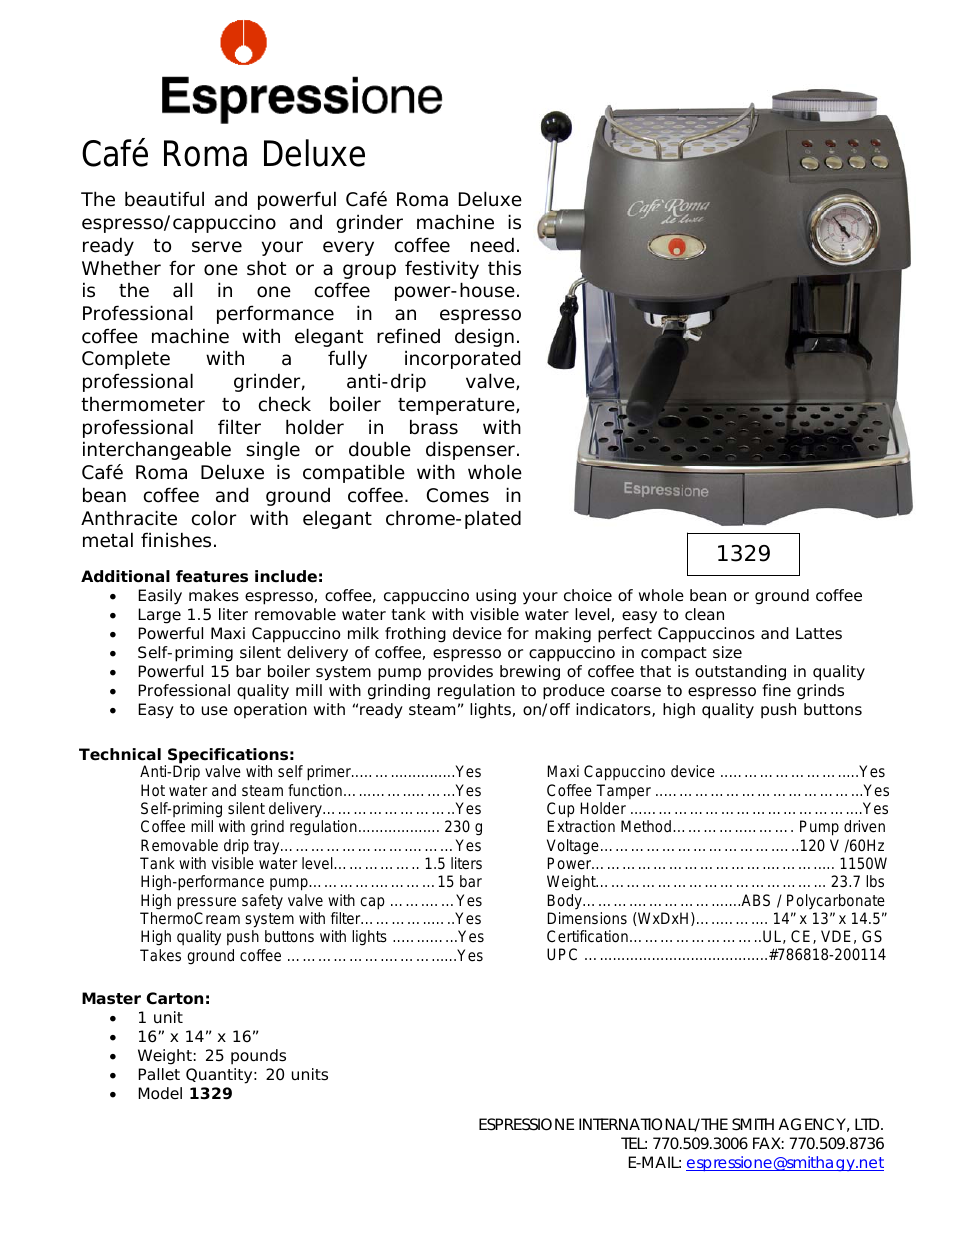 Cafe Roma Deluxe 1329